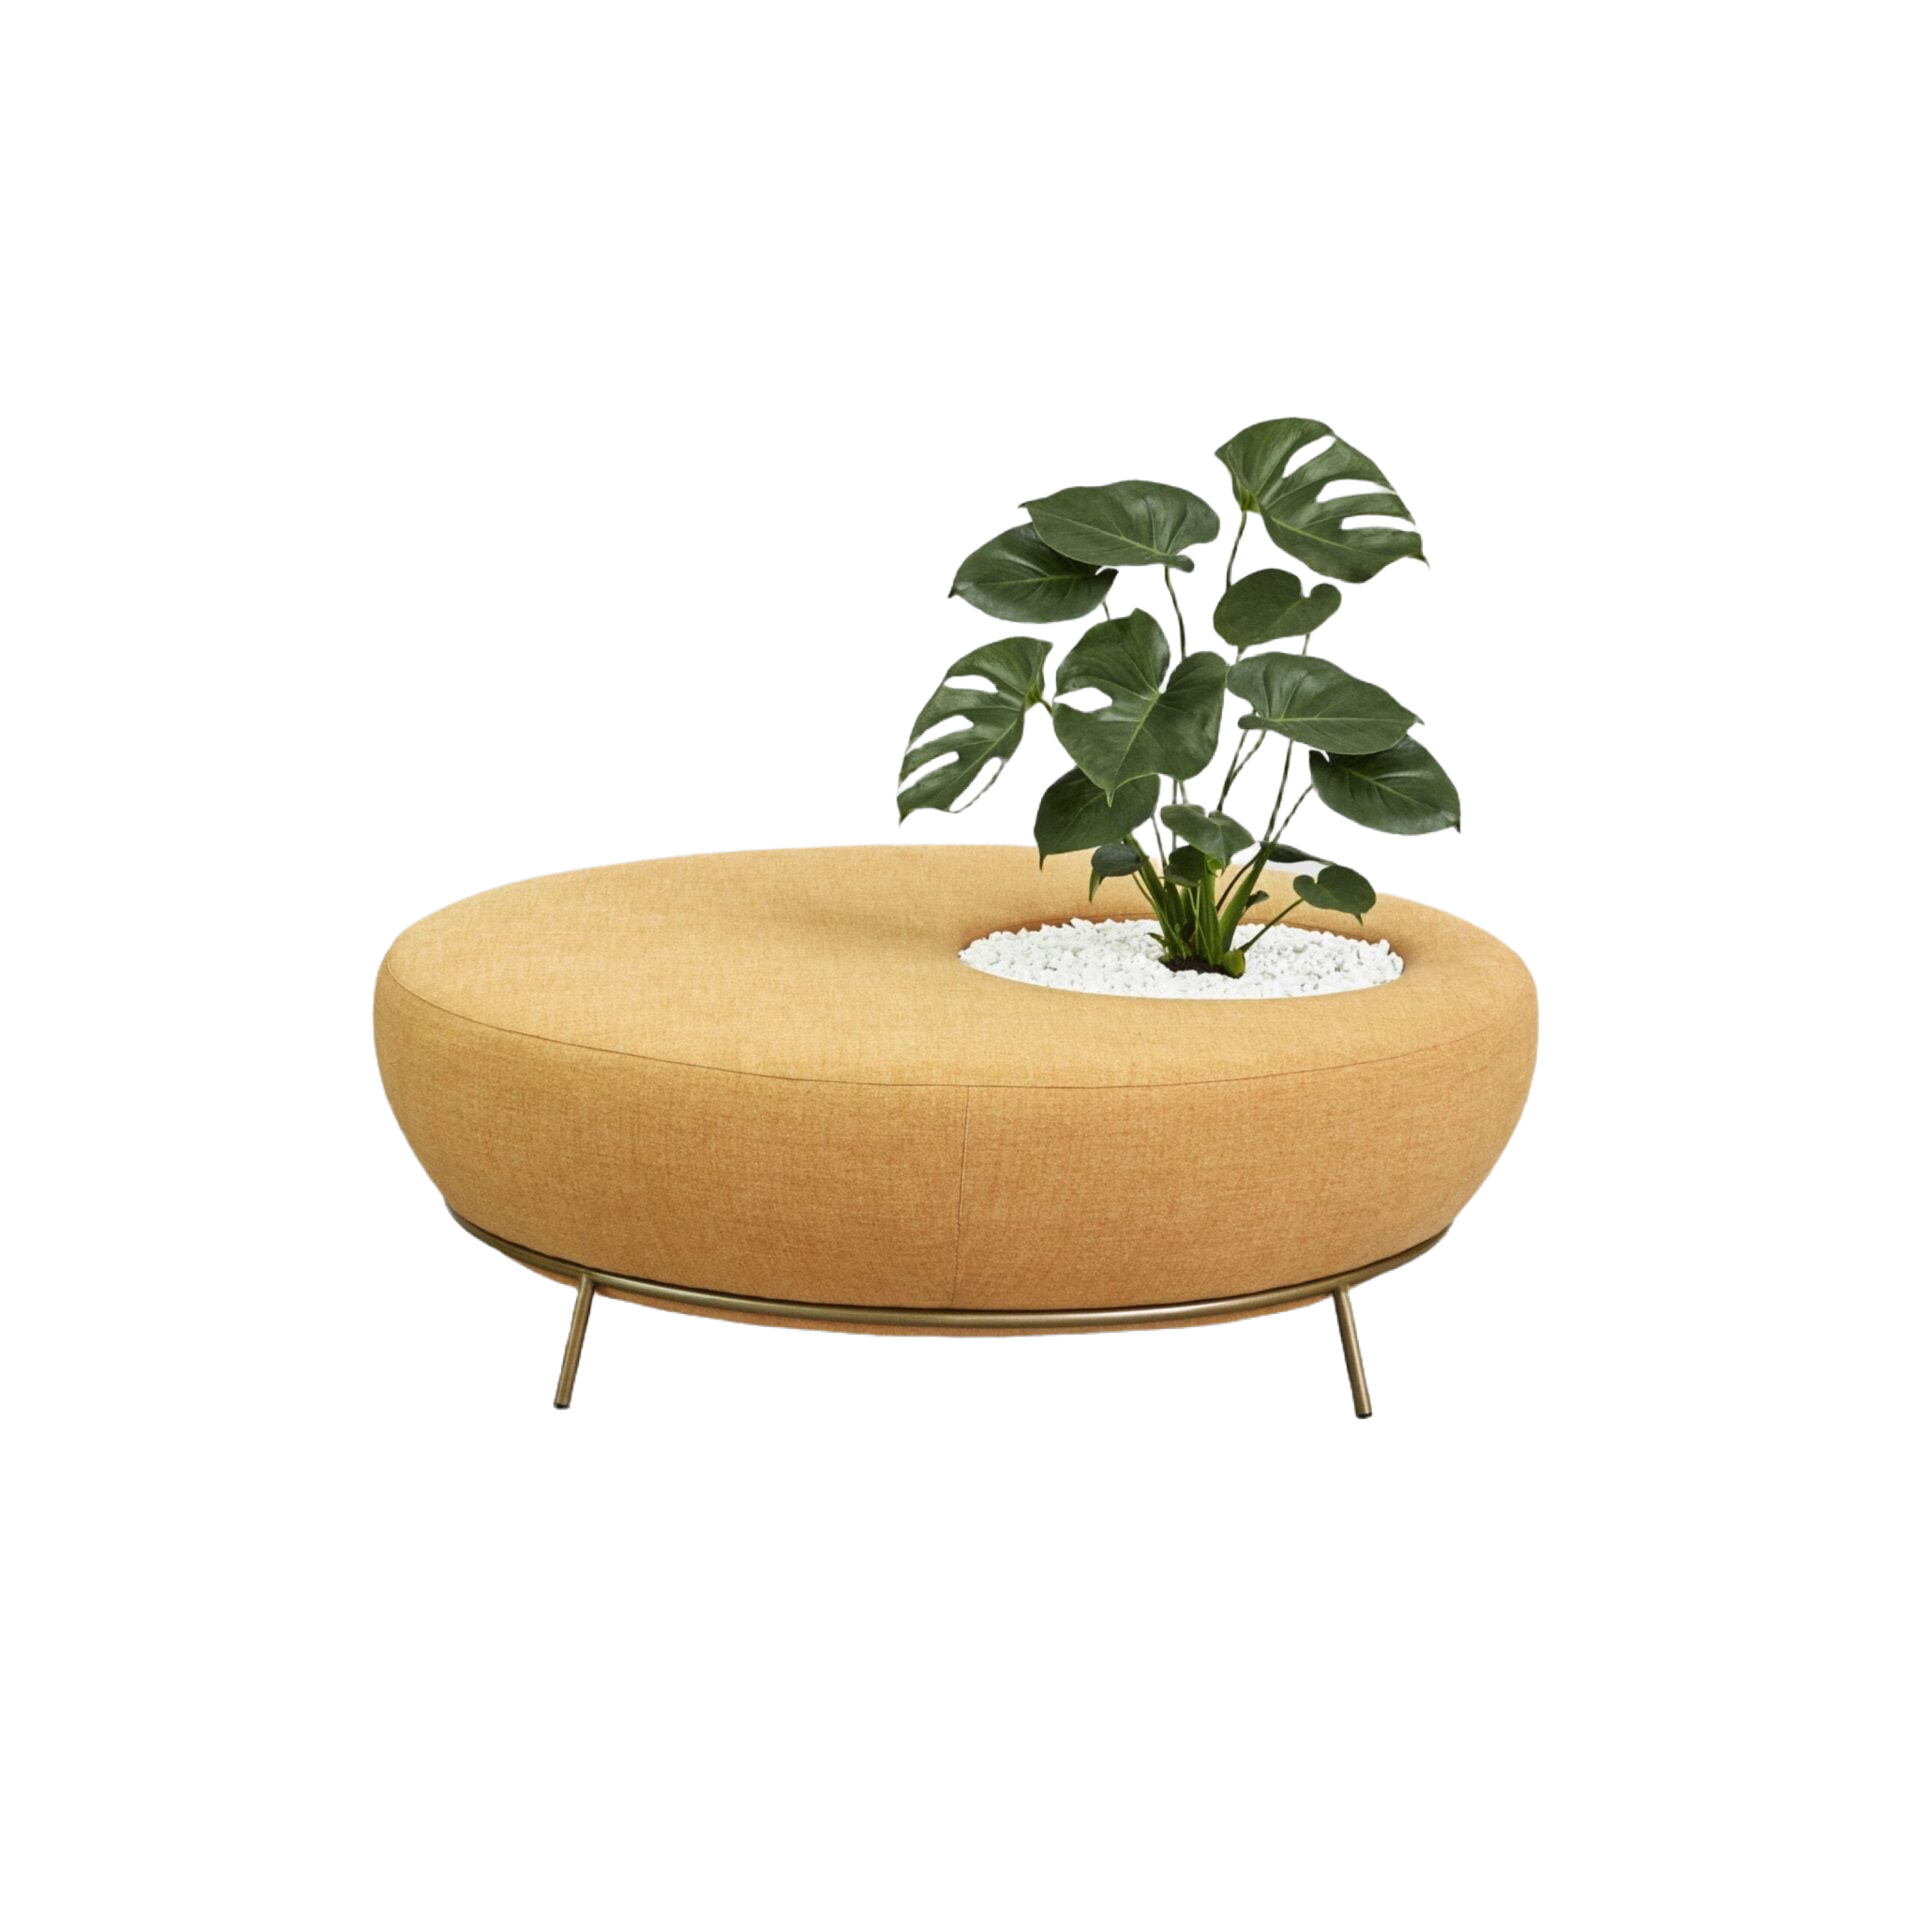 Nest Round Sofa with Plant-Missana-Contract Furniture Store